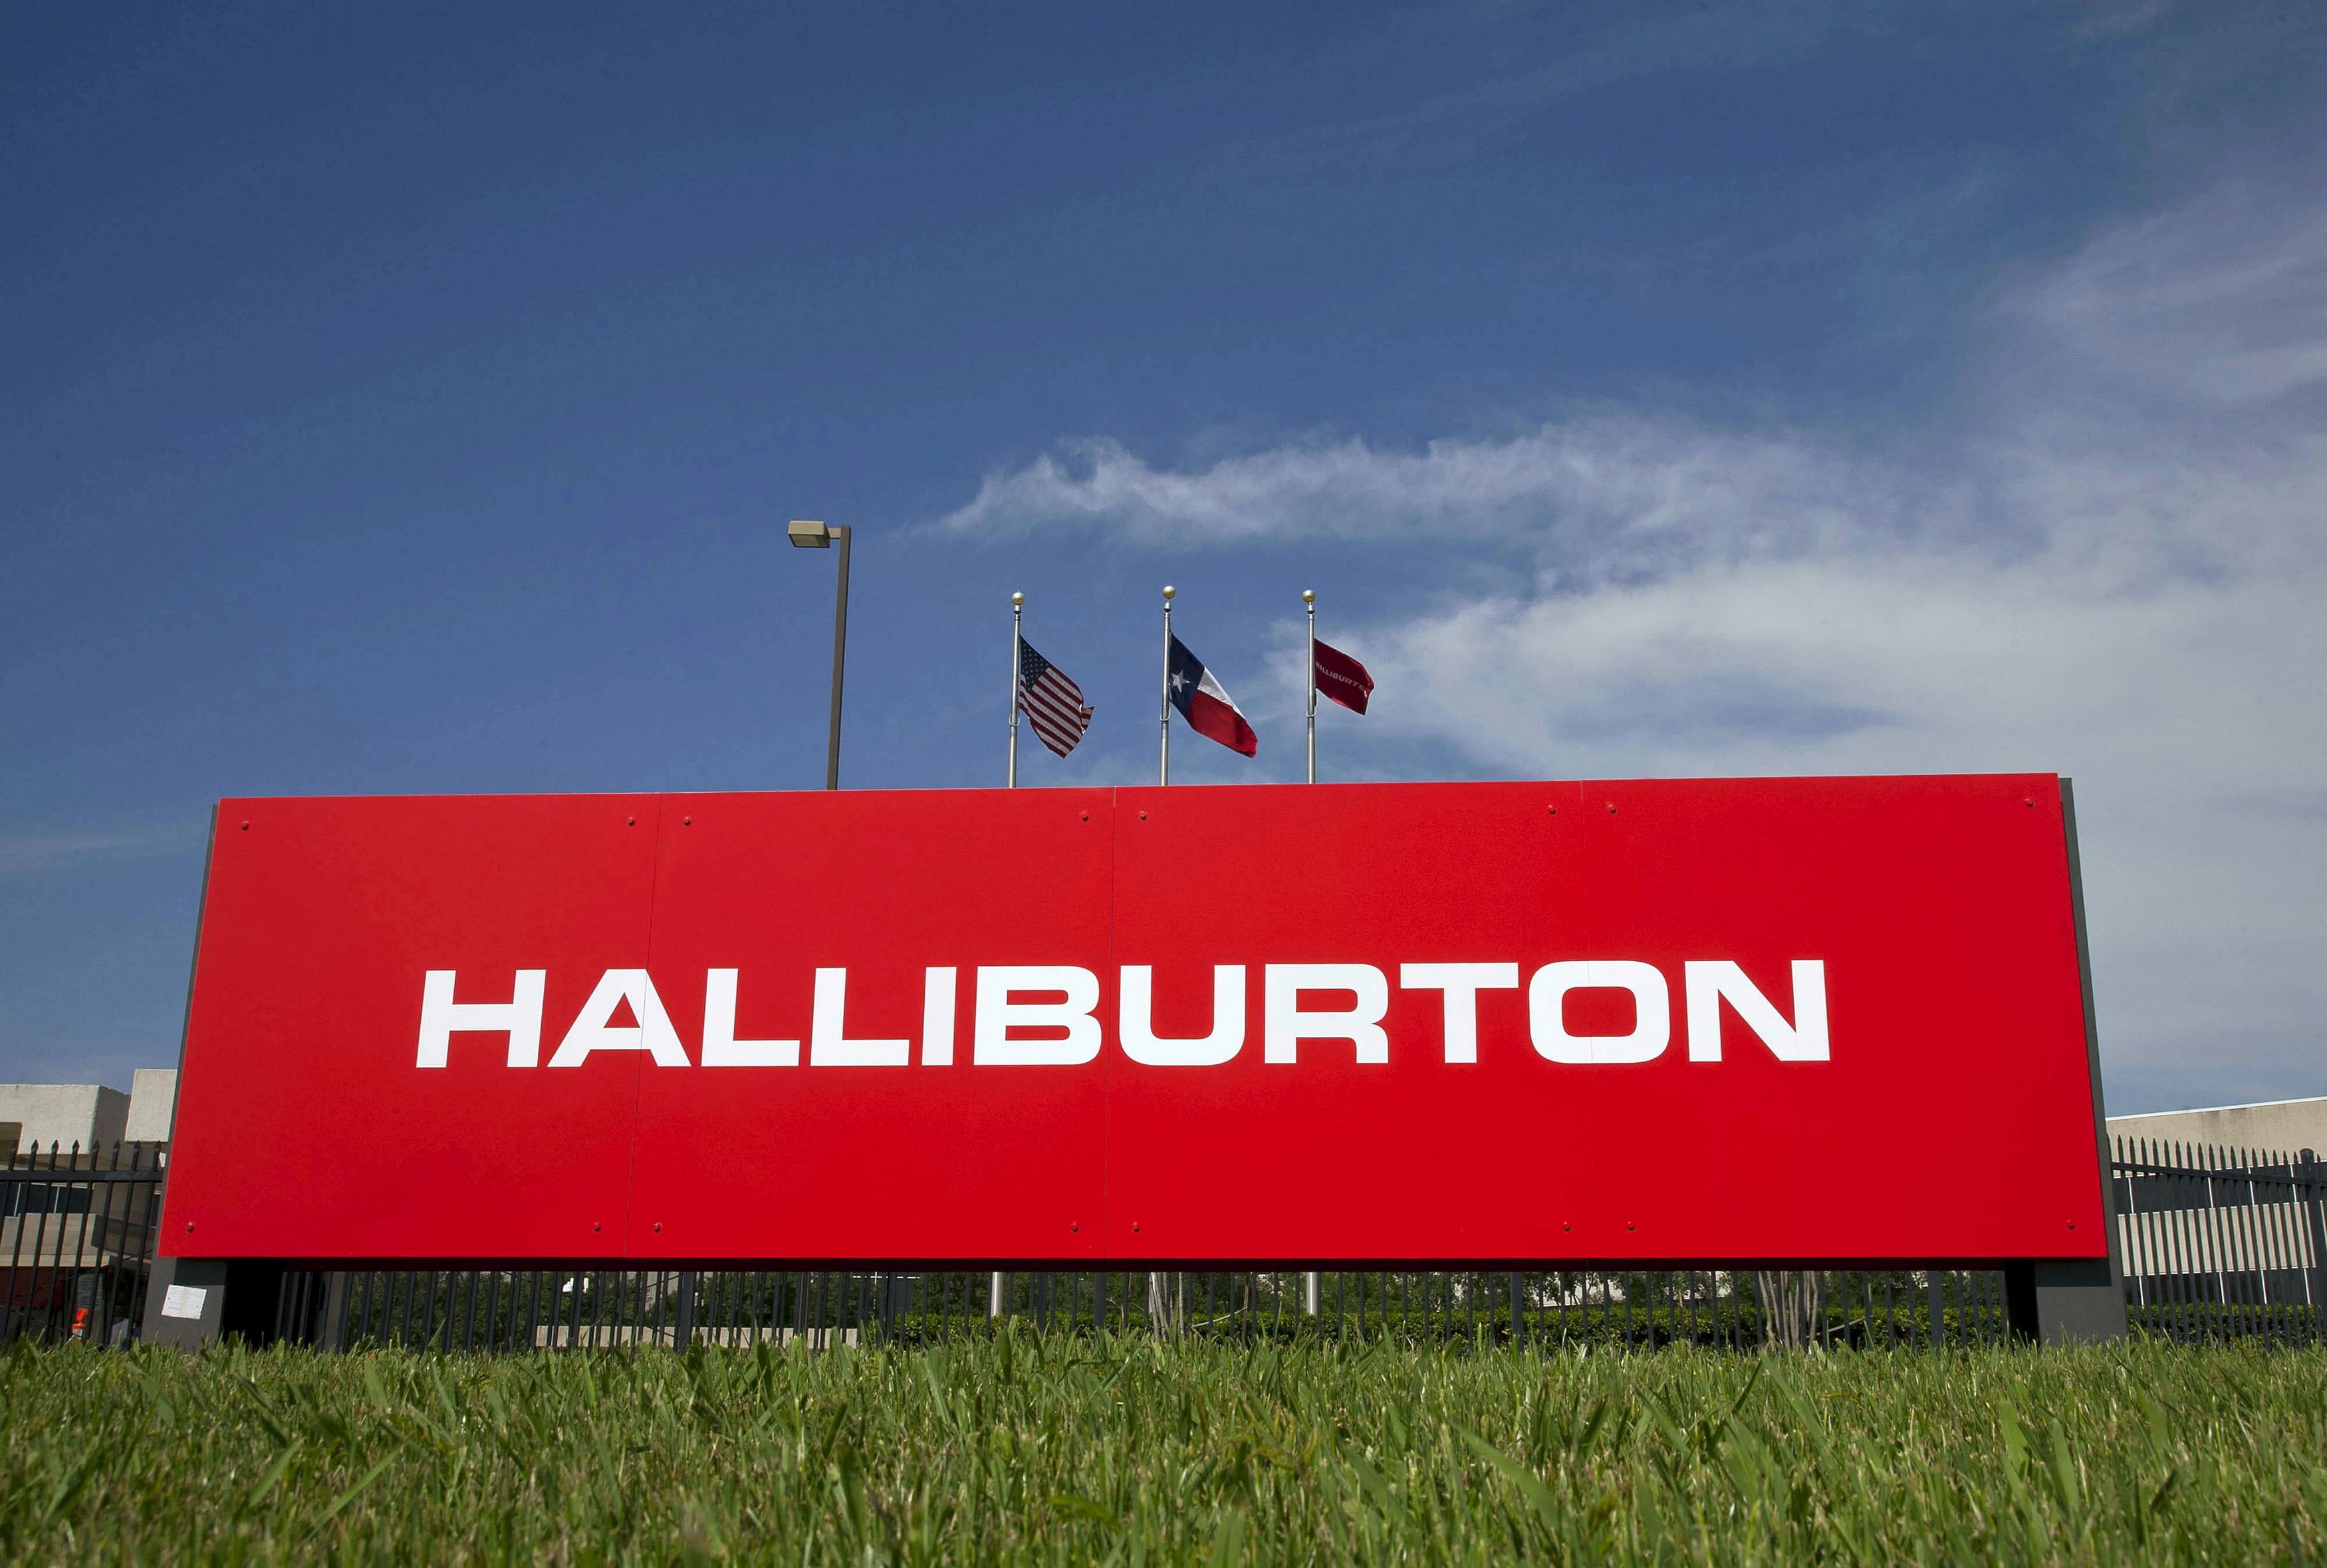 Wolfe Research Targets Halliburton (HAL) with $52 Price, Foresees 34% Upside